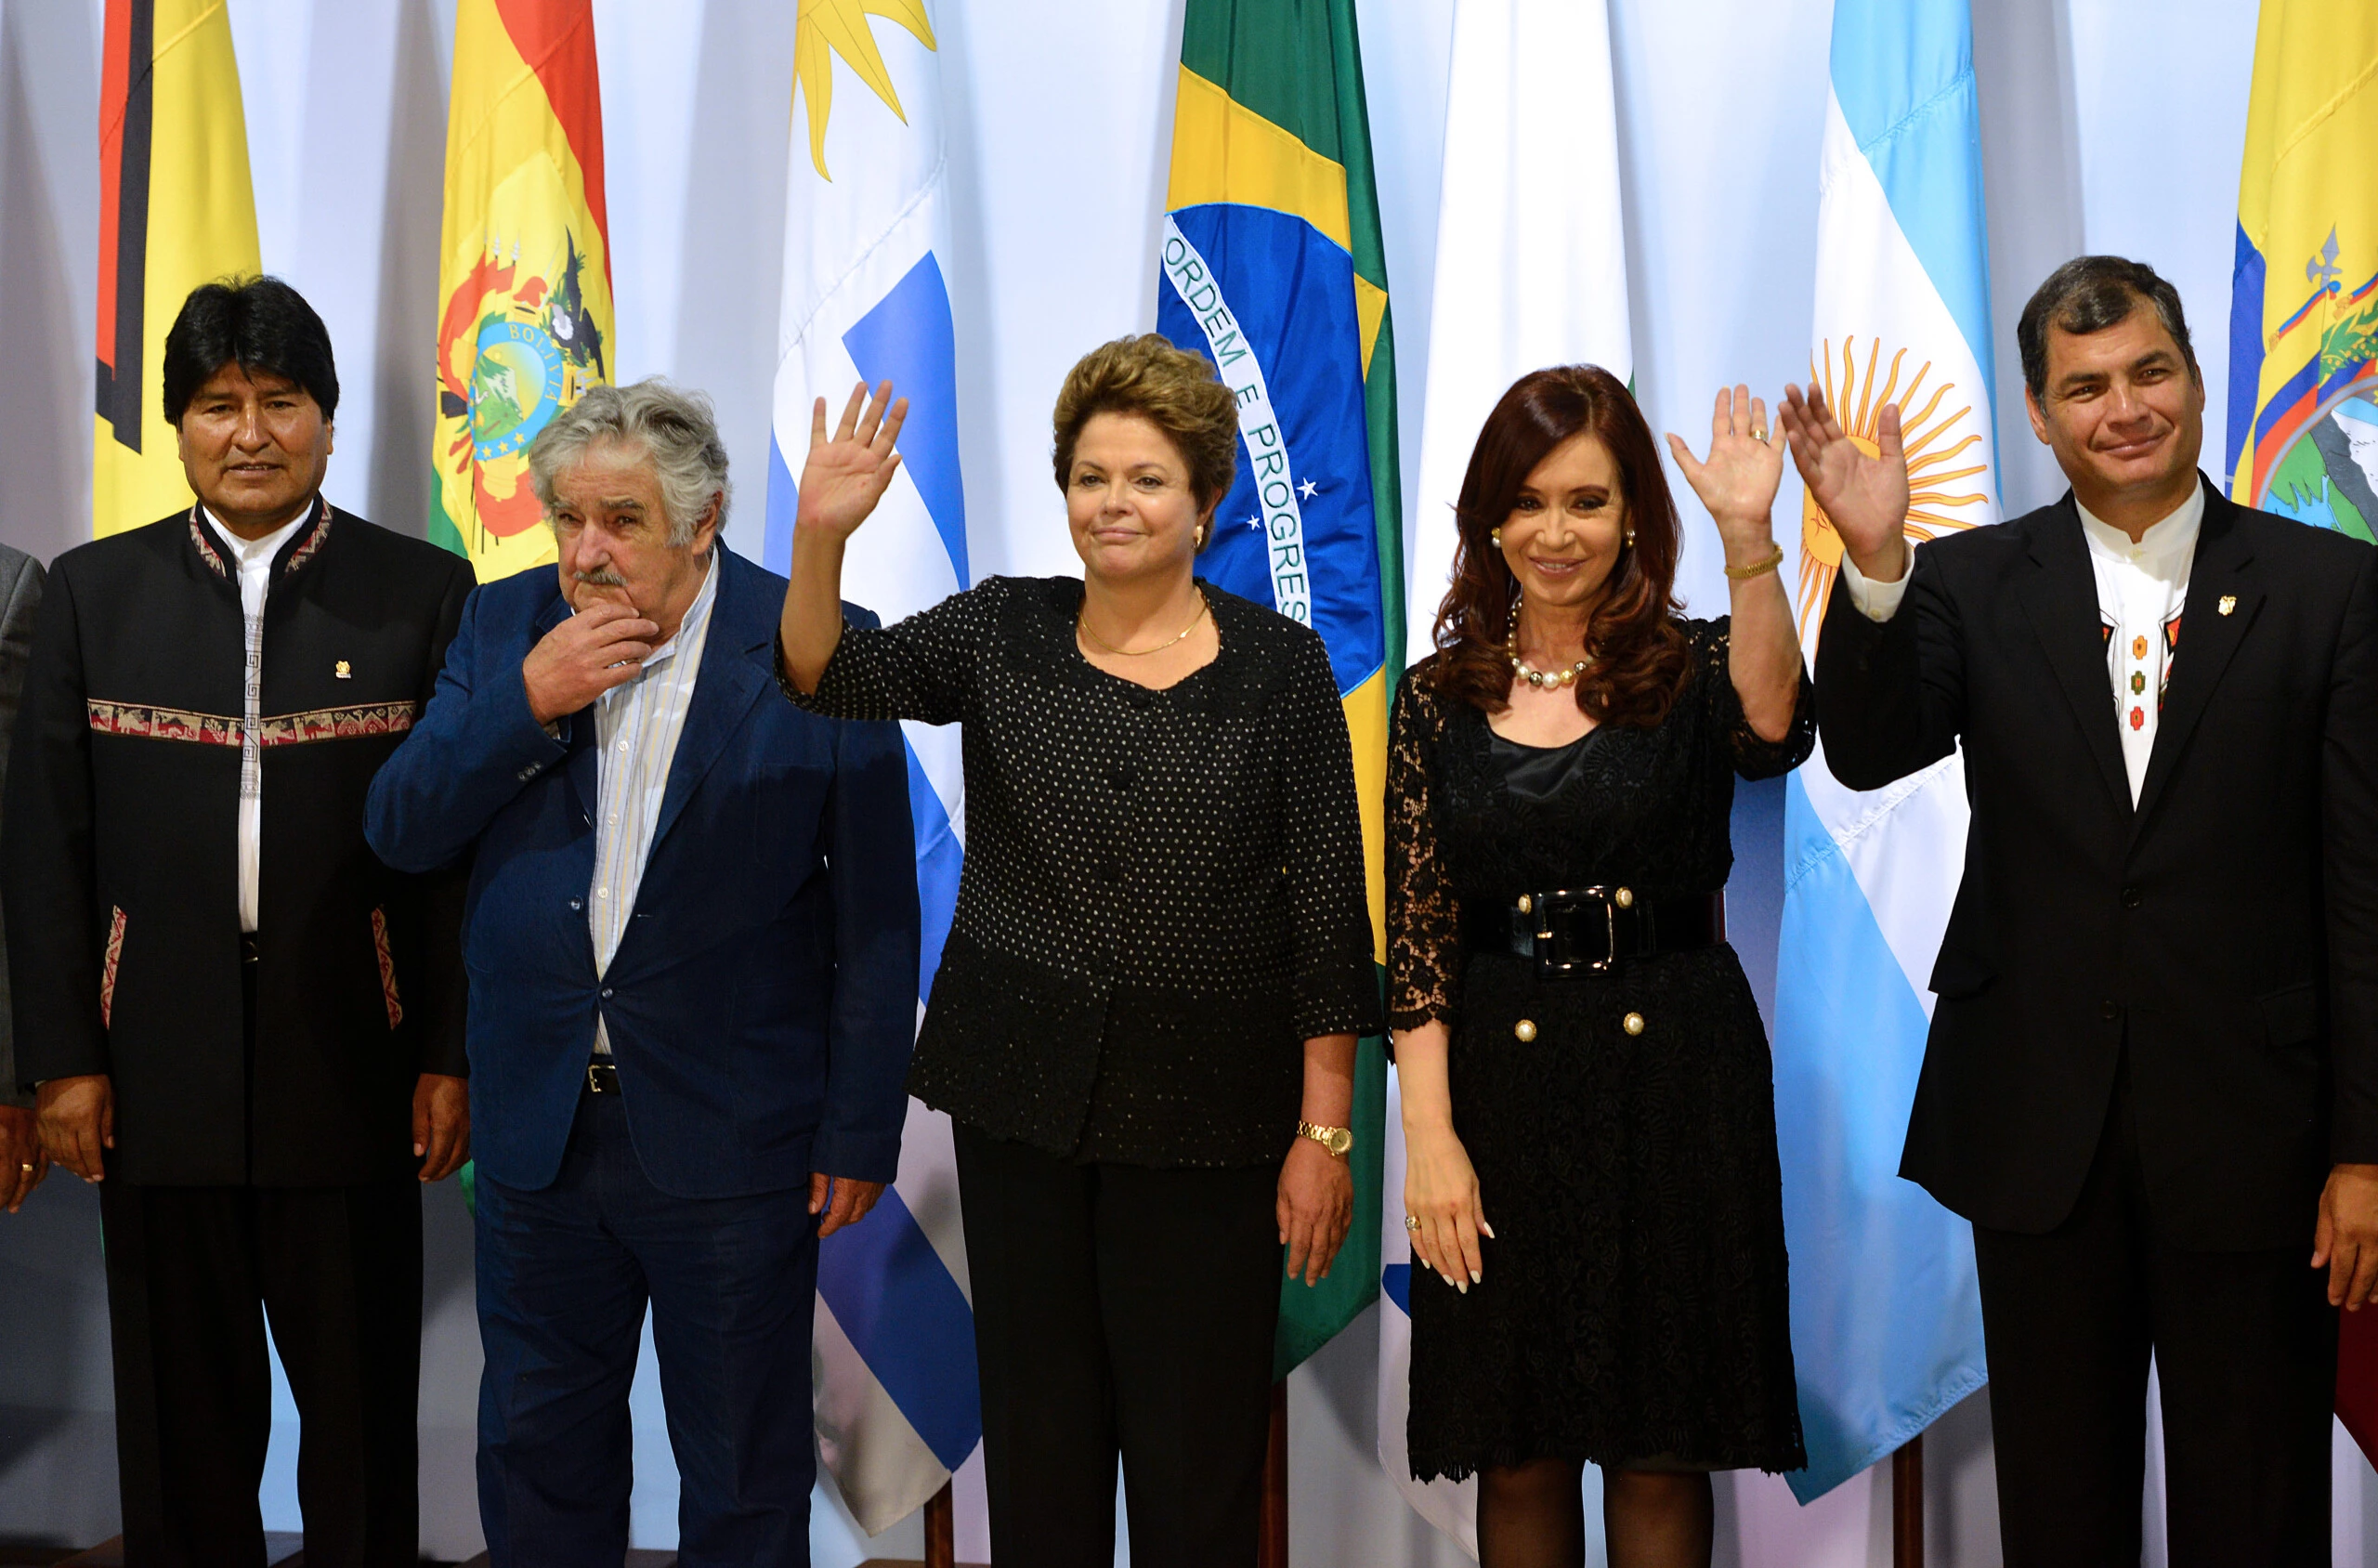 (L to R) Presidents from Bolivia, Evo Morales, Uruguay, Jose Mujica, Brazil, Dilma Rousseff, Argentinian Cristina Fernandez de Kirchner and Ecuador, Rafael Correa, pose for the official picture of the Summit of Heads of State of Mercosur and Associated States, at Itamaraty Palace, Bras?lia on December 7, 2012. AFP PHOTO/Pedro LADEIRA        (Photo credit should read PEDRO LADEIRA/AFP/Getty Images)